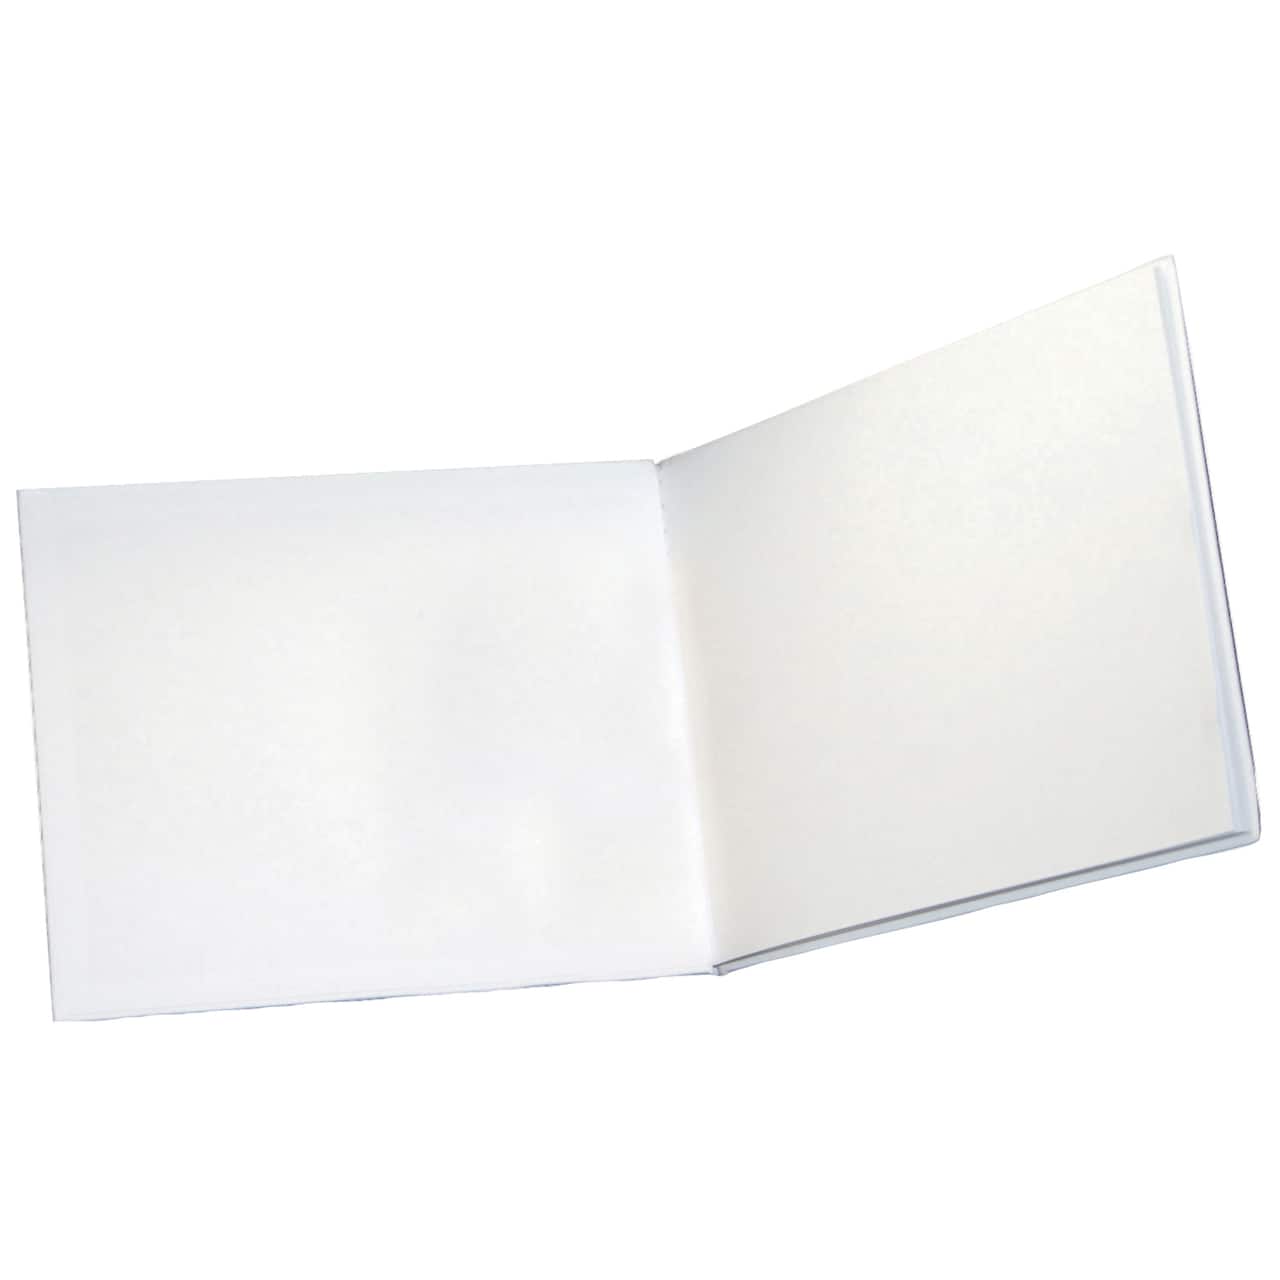 White Hardcover Blank Book, 10 Count